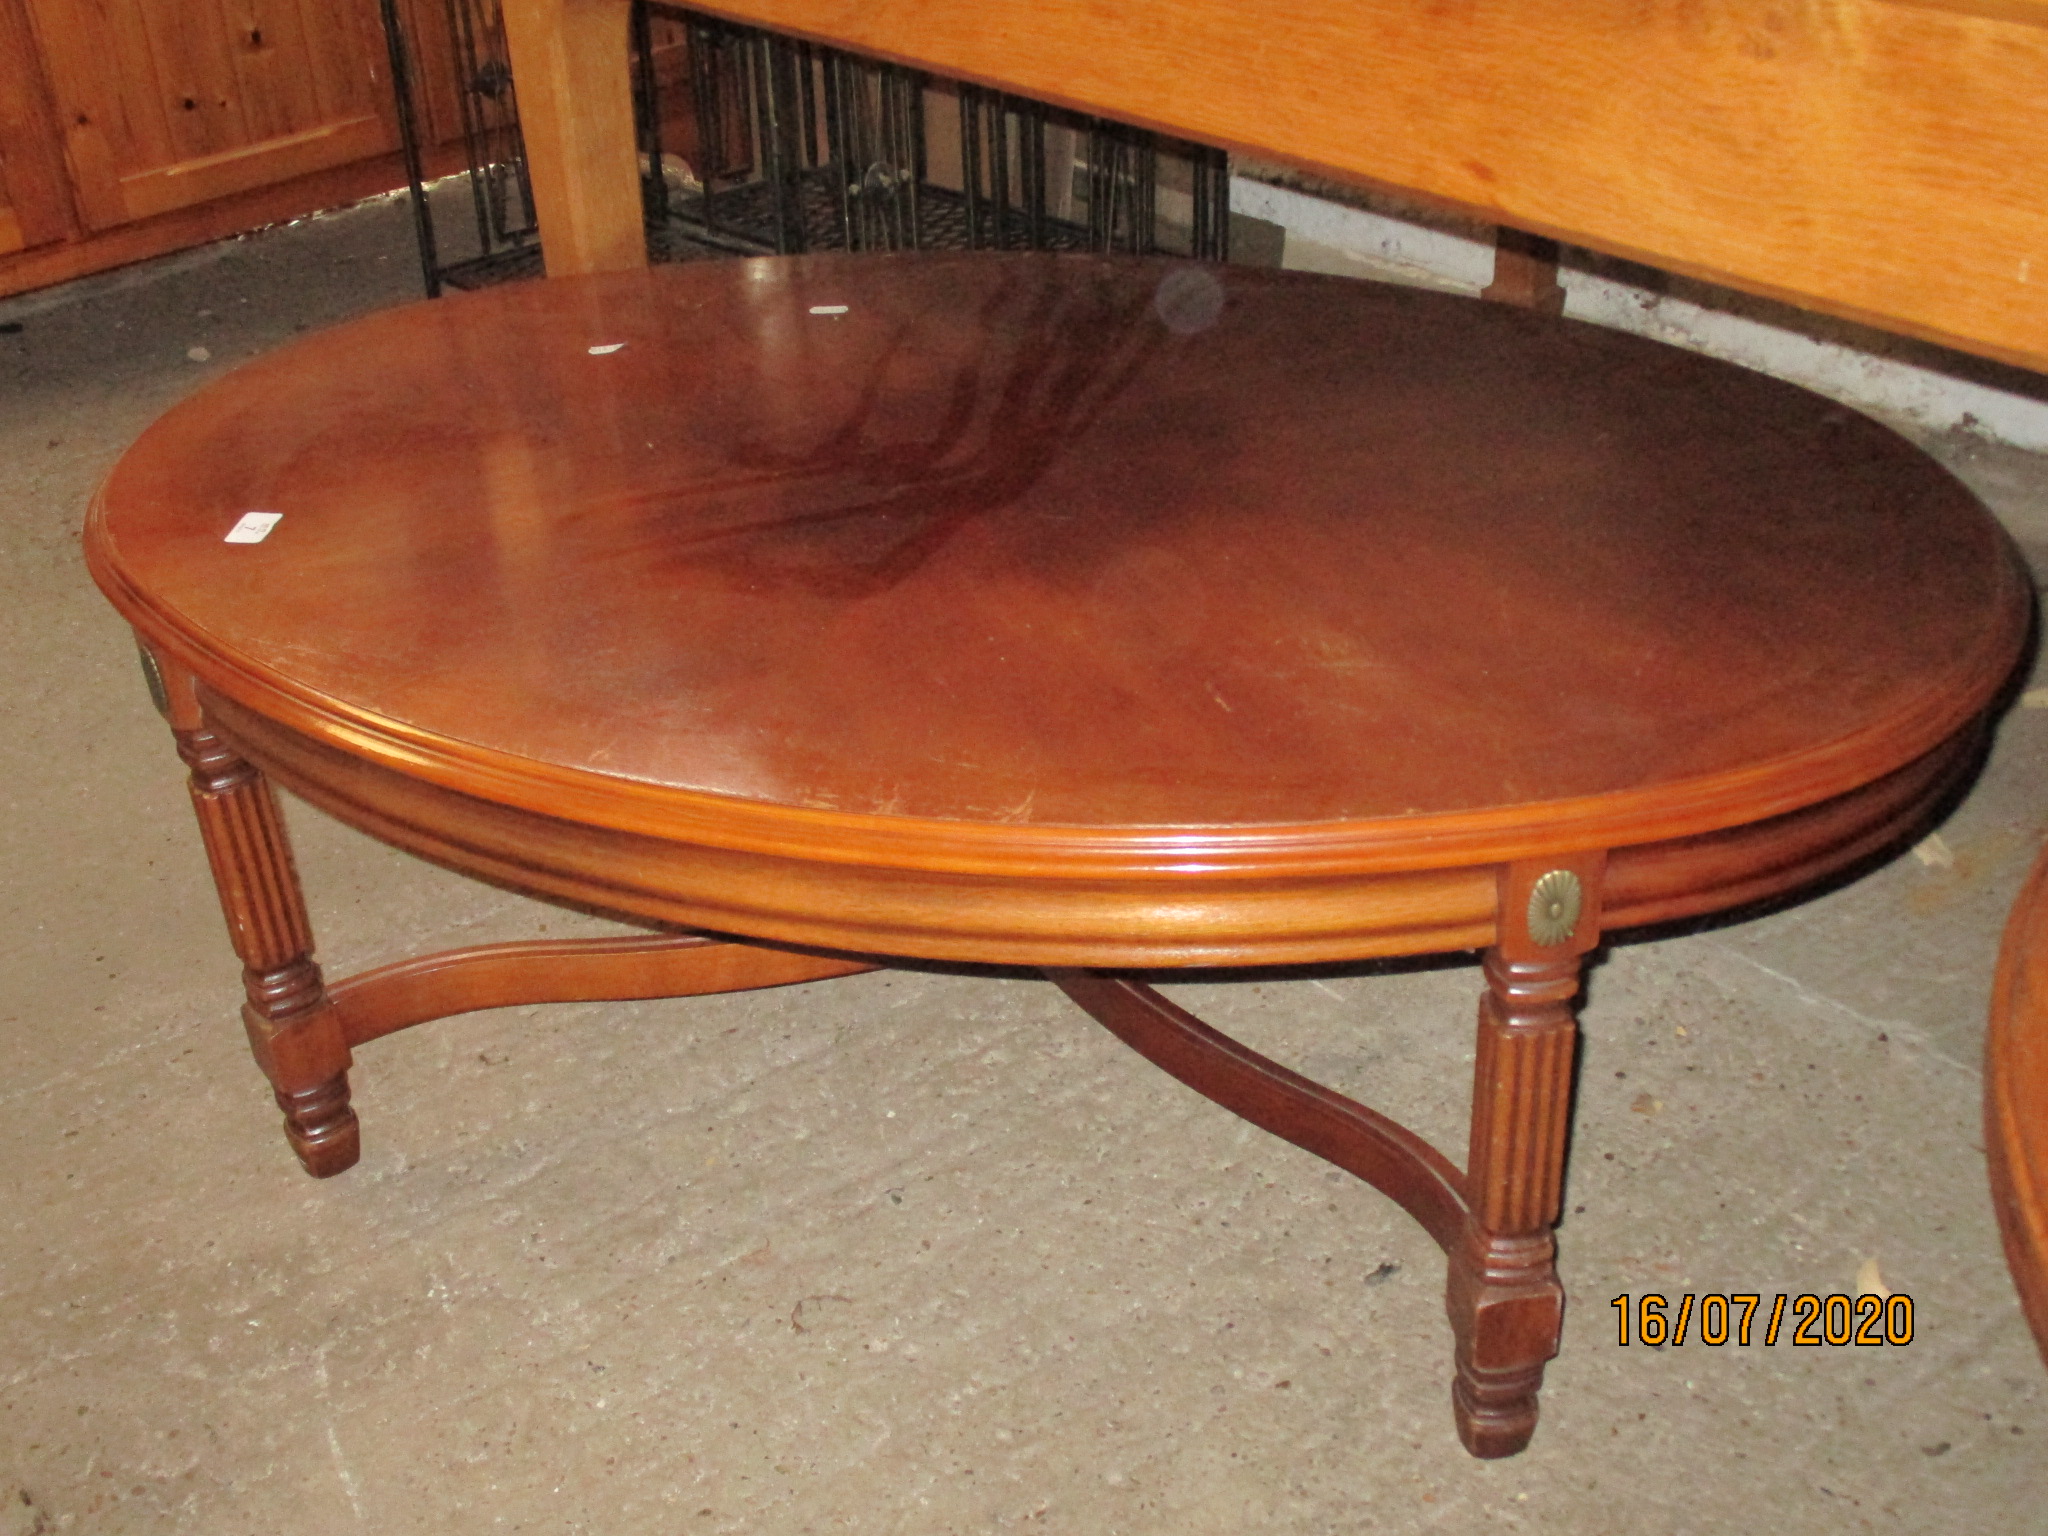 OVAL REPRODUCTION COFFEE TABLE ON REEDED LEGS, LENGTH APPROX 110CM